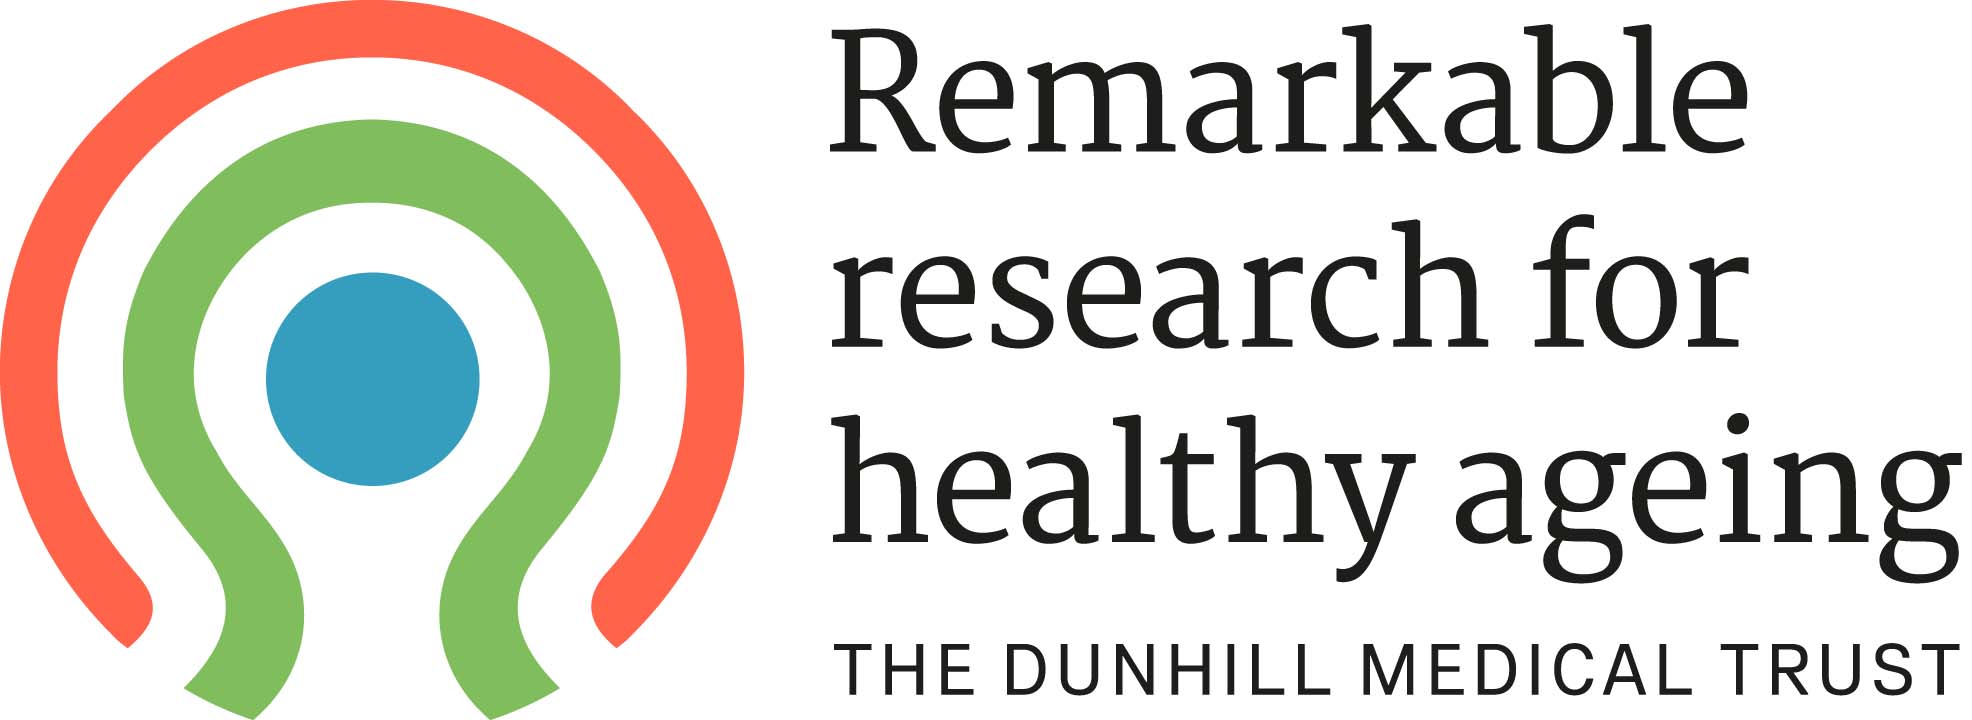 logo for The Dunhill Medical Trust